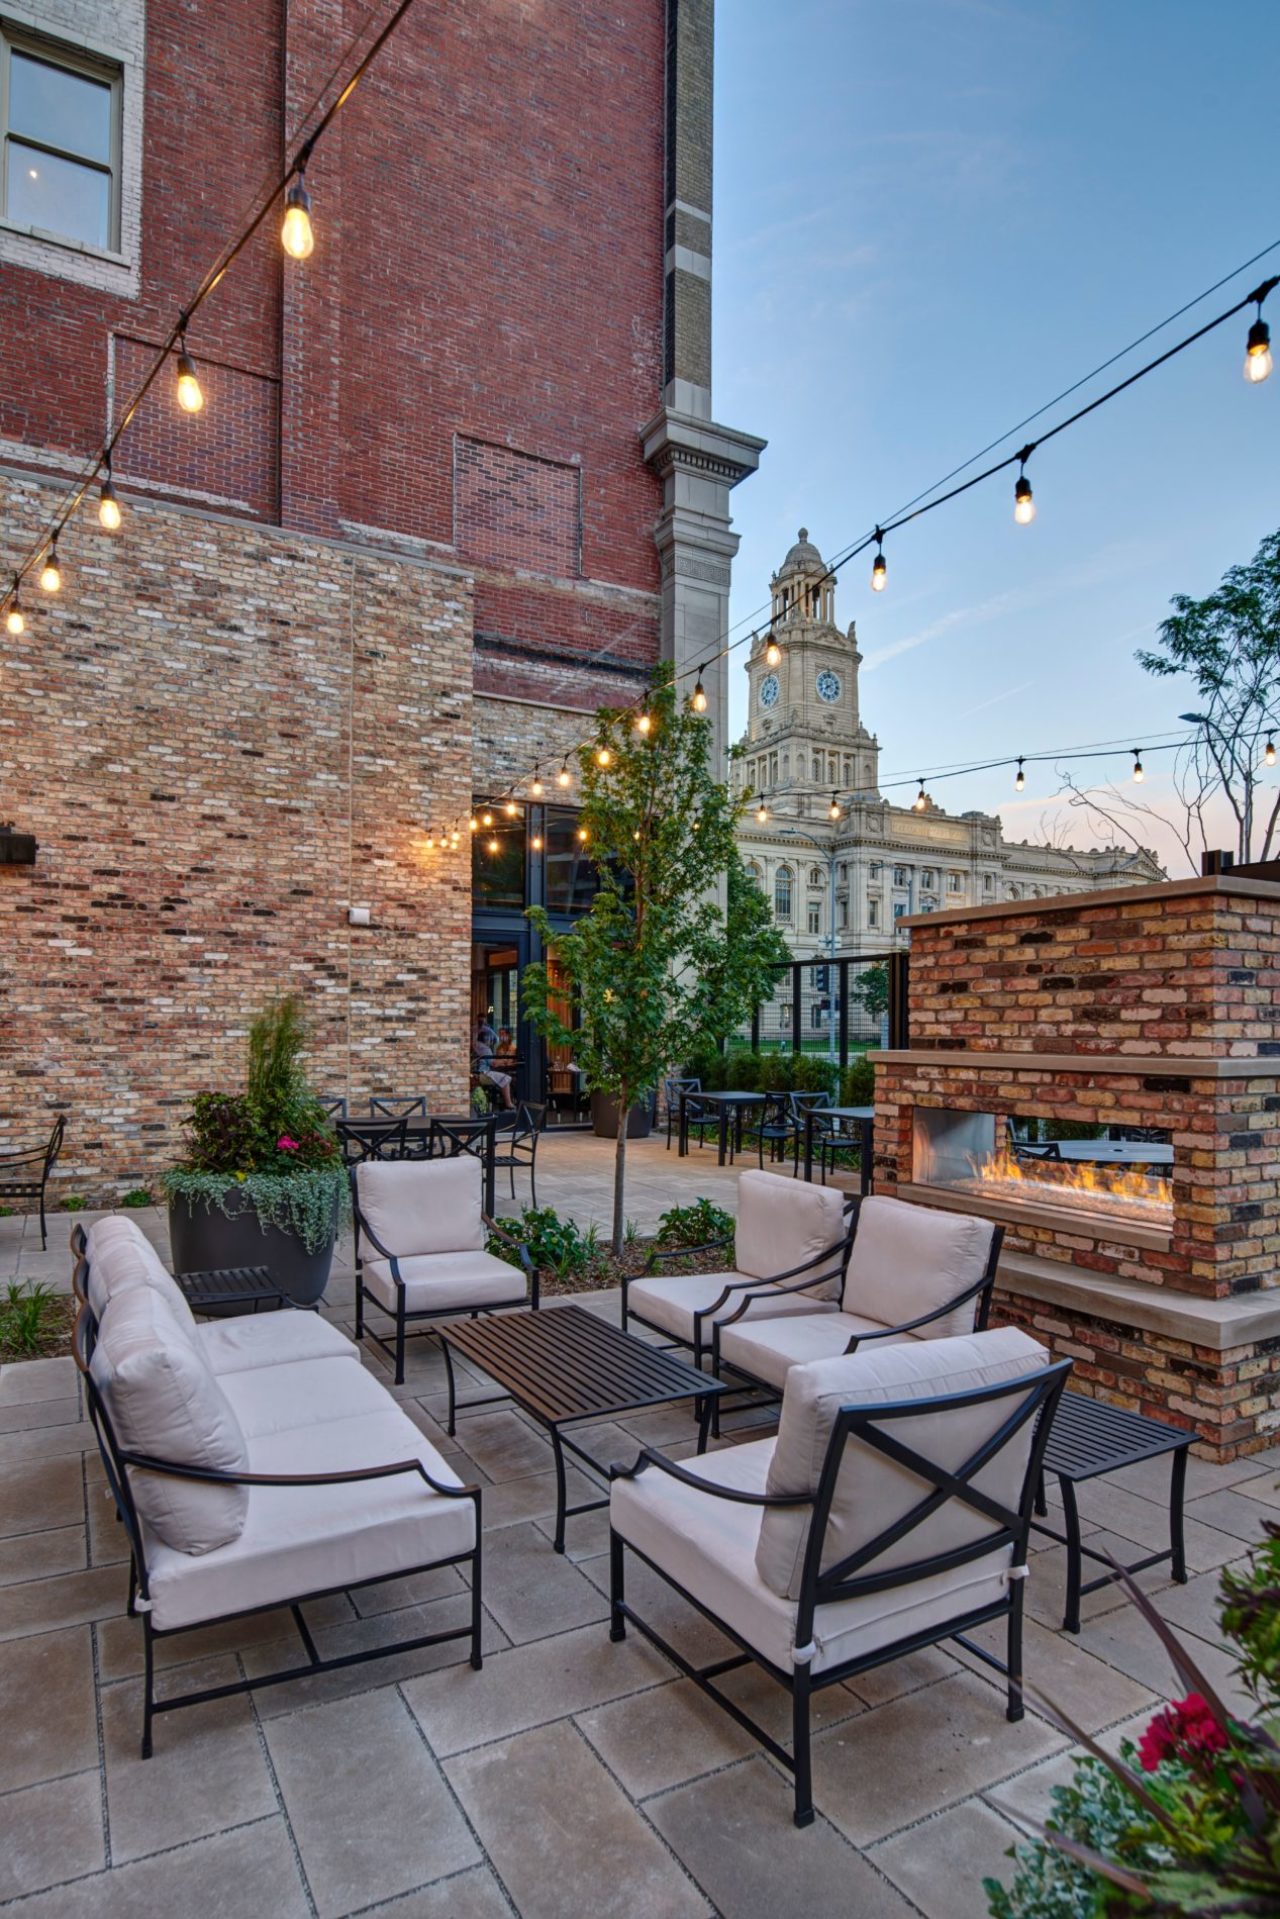 String lights over chairs and an outdoor fireplace at our patio bar in Des Moines